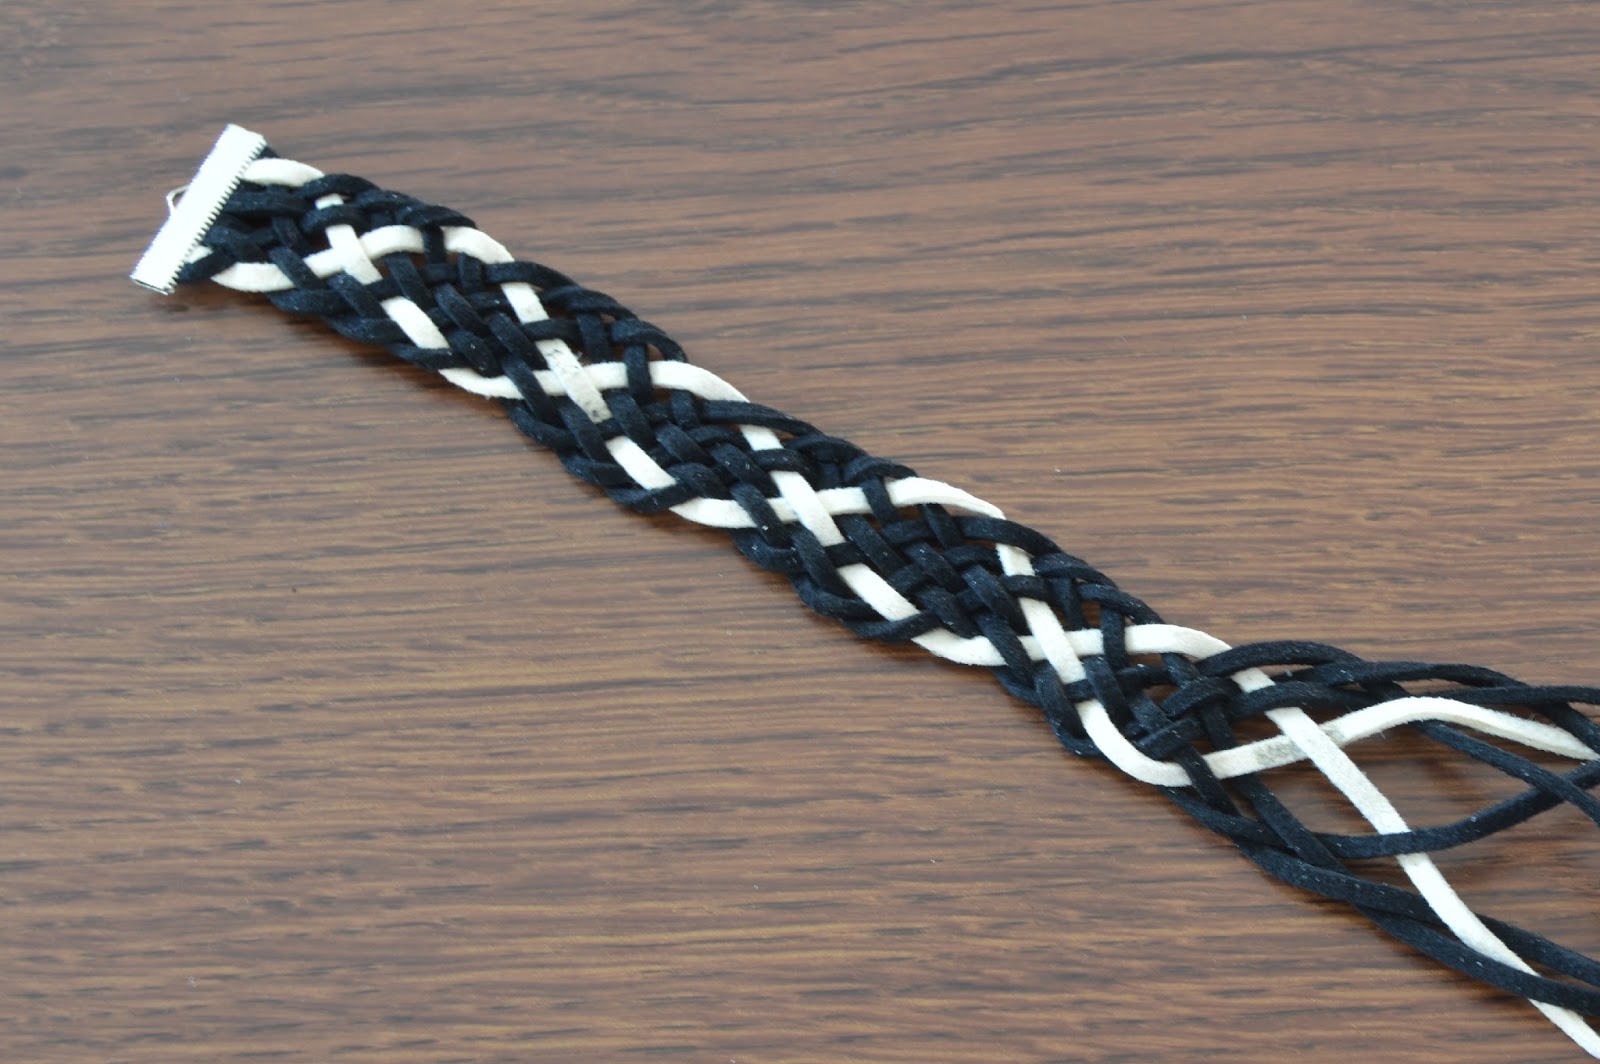 braid with one rope | Rope diy, Spool knitting, Rope crafts